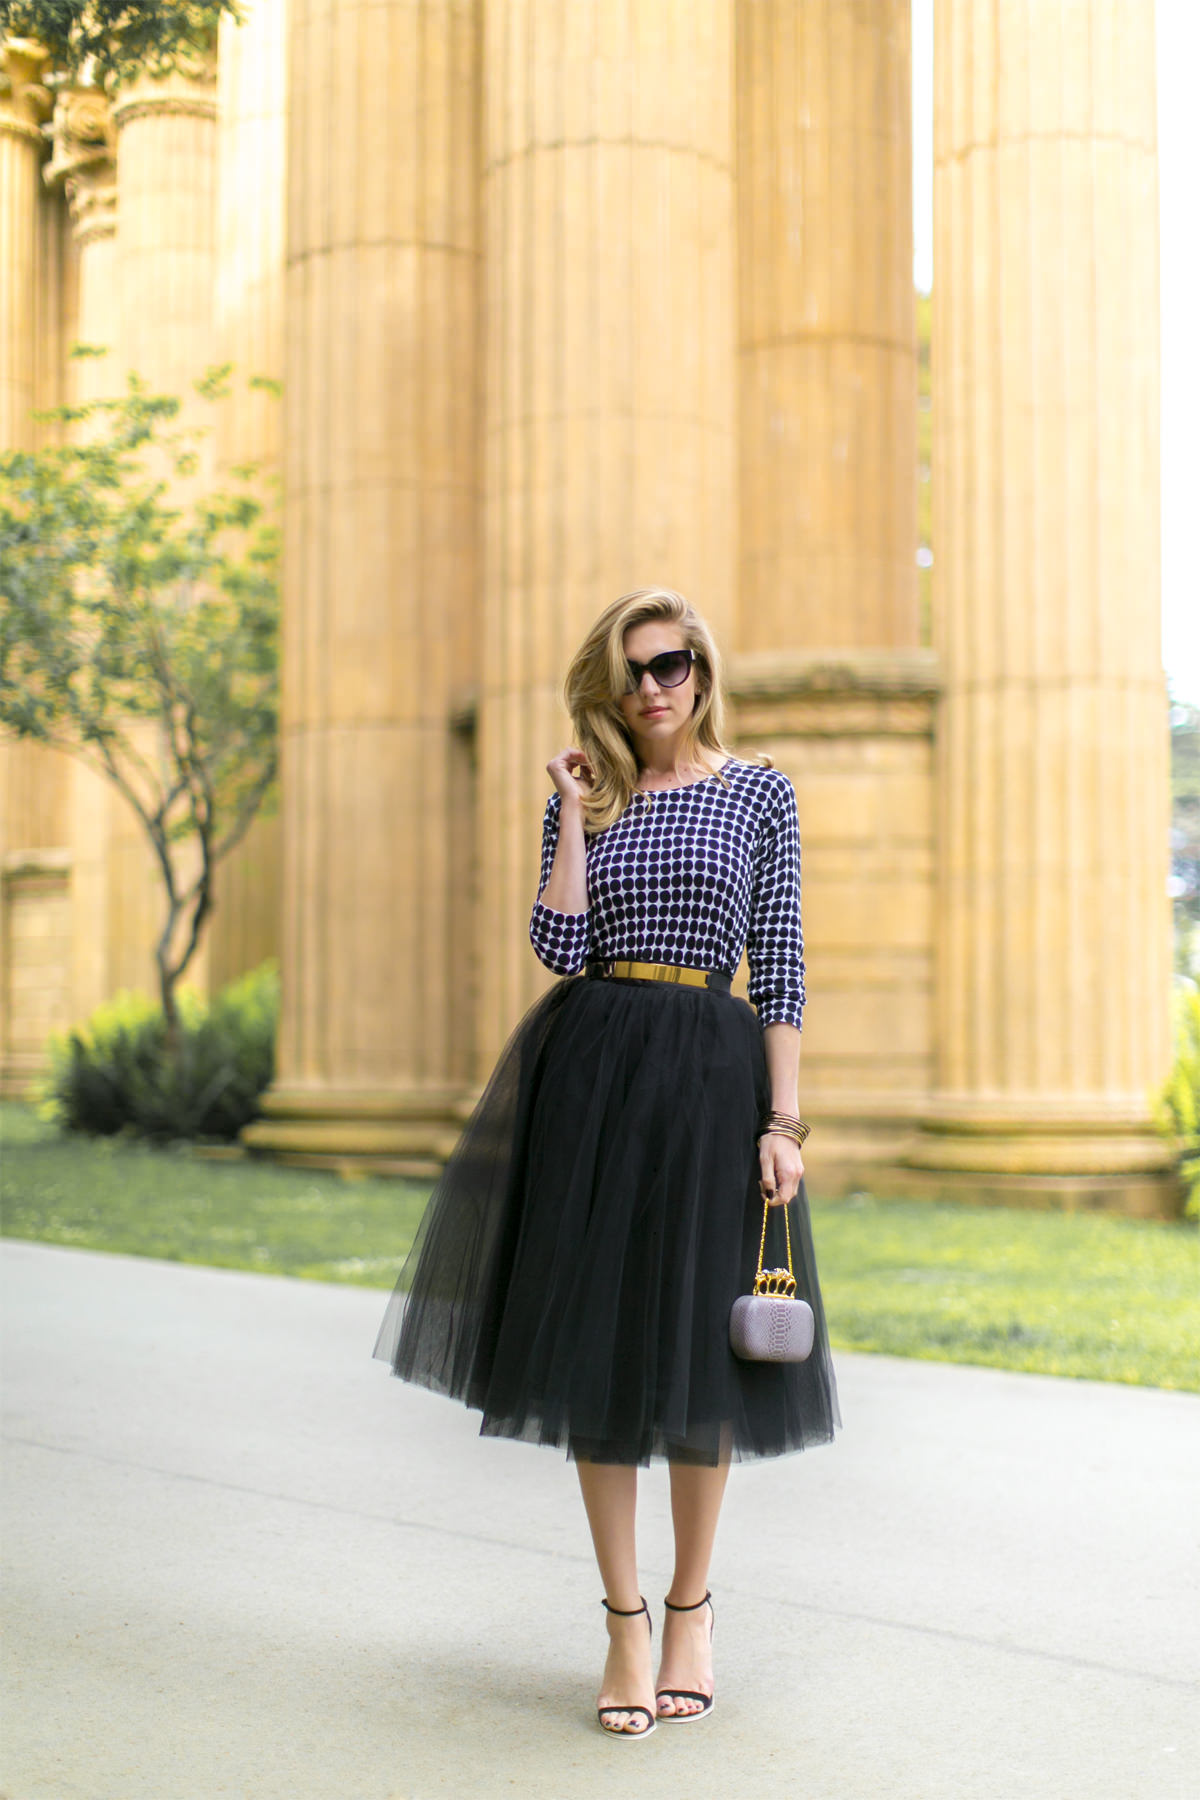 How to Wear A Black Tulle Skirt Professionally